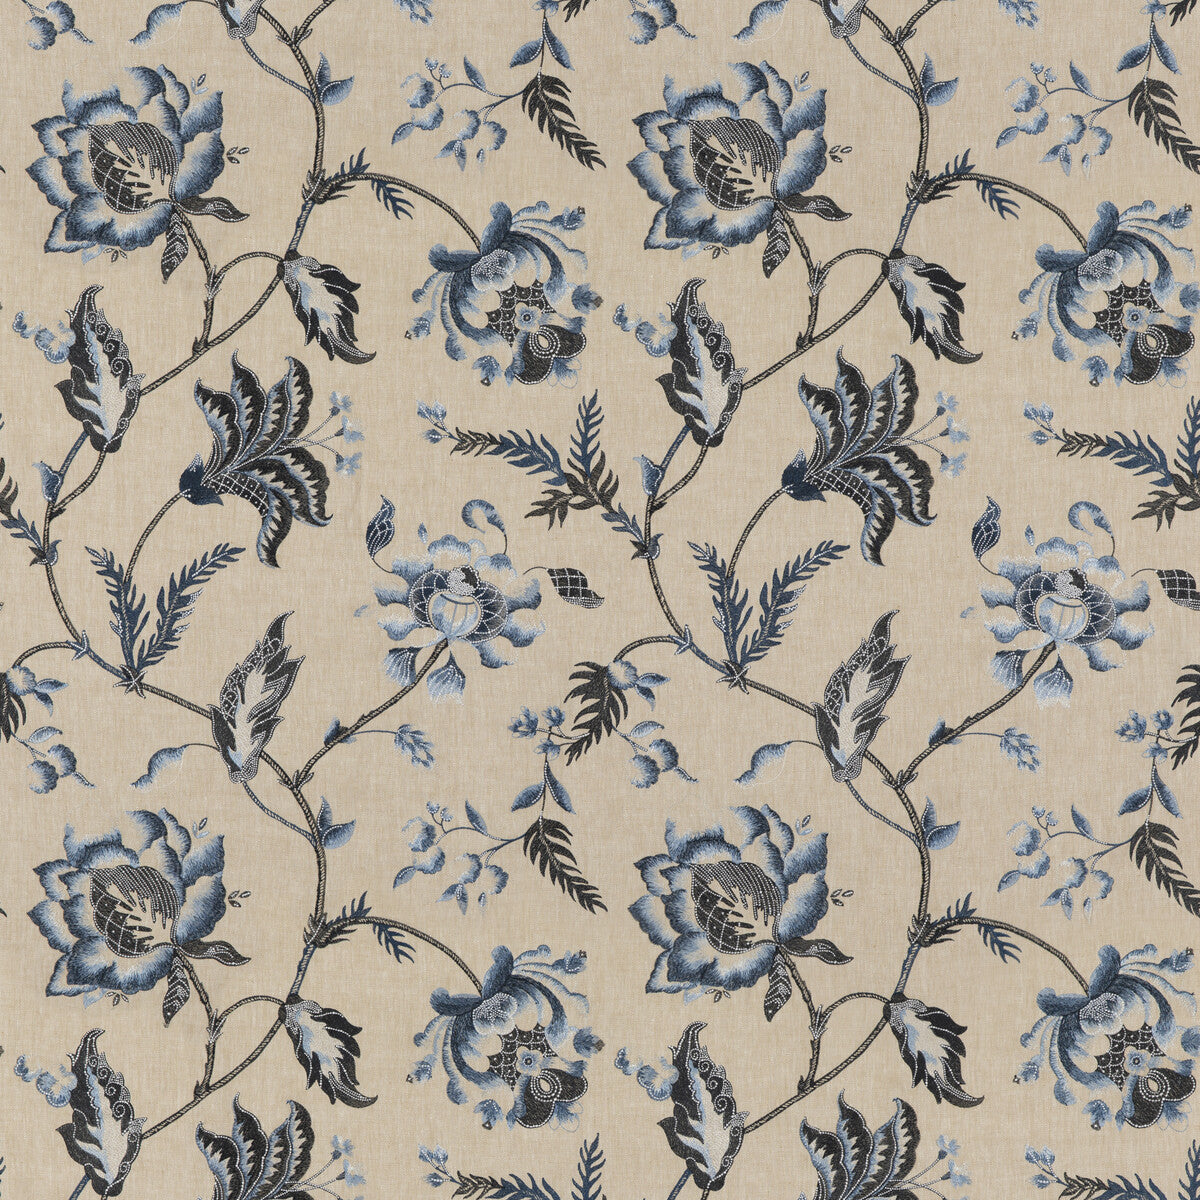 Antique Trail fabric in indigo color - pattern BF10906.1.0 - by G P &amp; J Baker in the Portobello collection